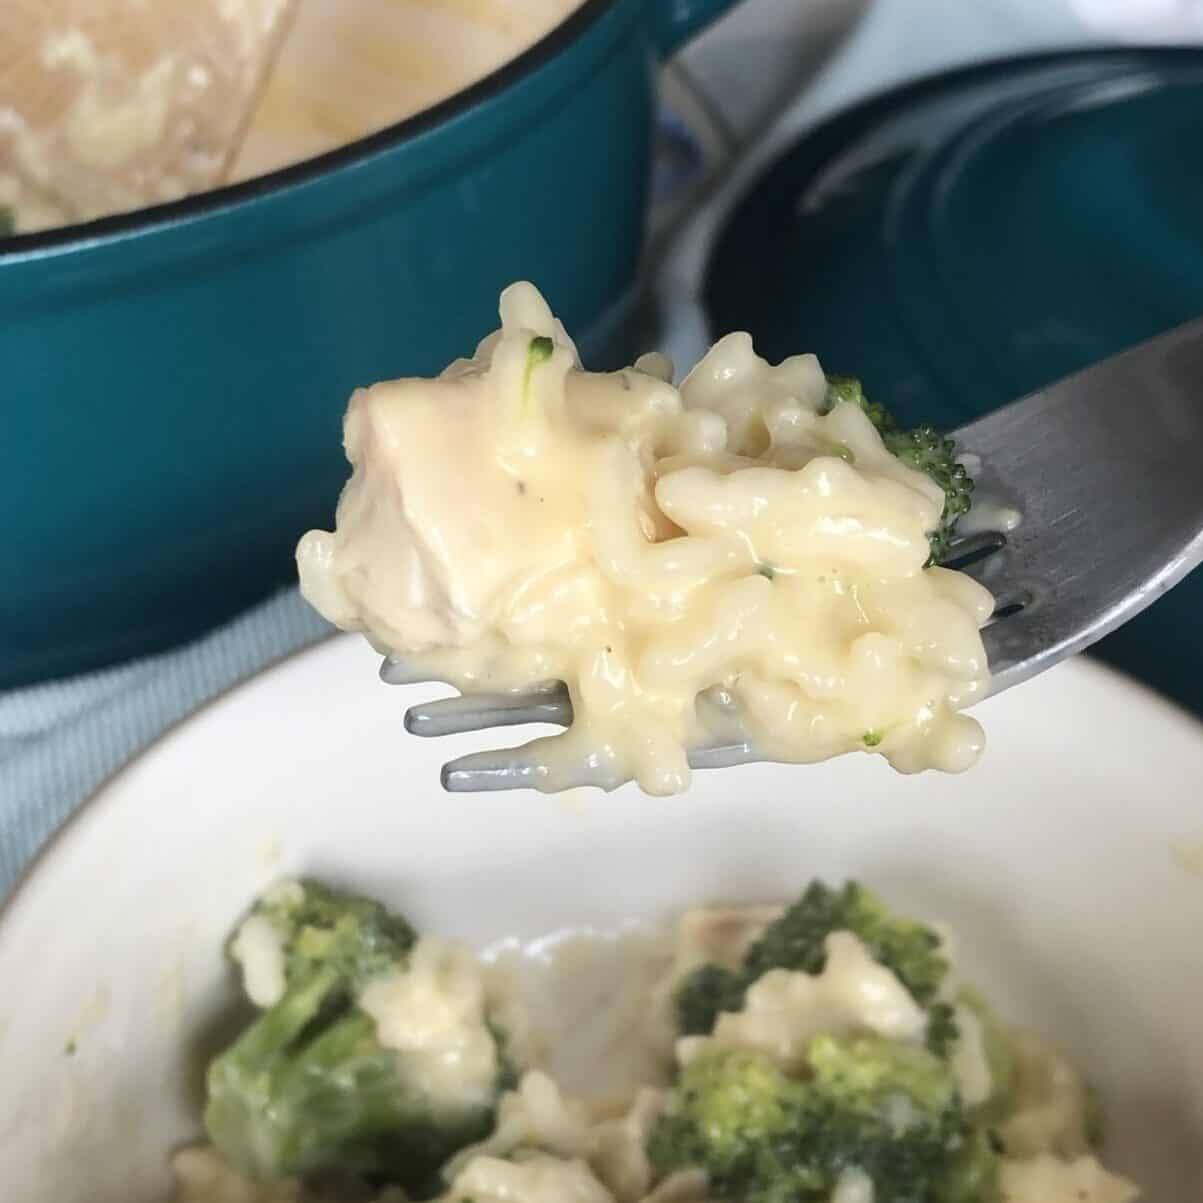 A forkful of risotto with chicken and a bowl of chicken and broccoli risotto with a teal pot in the background